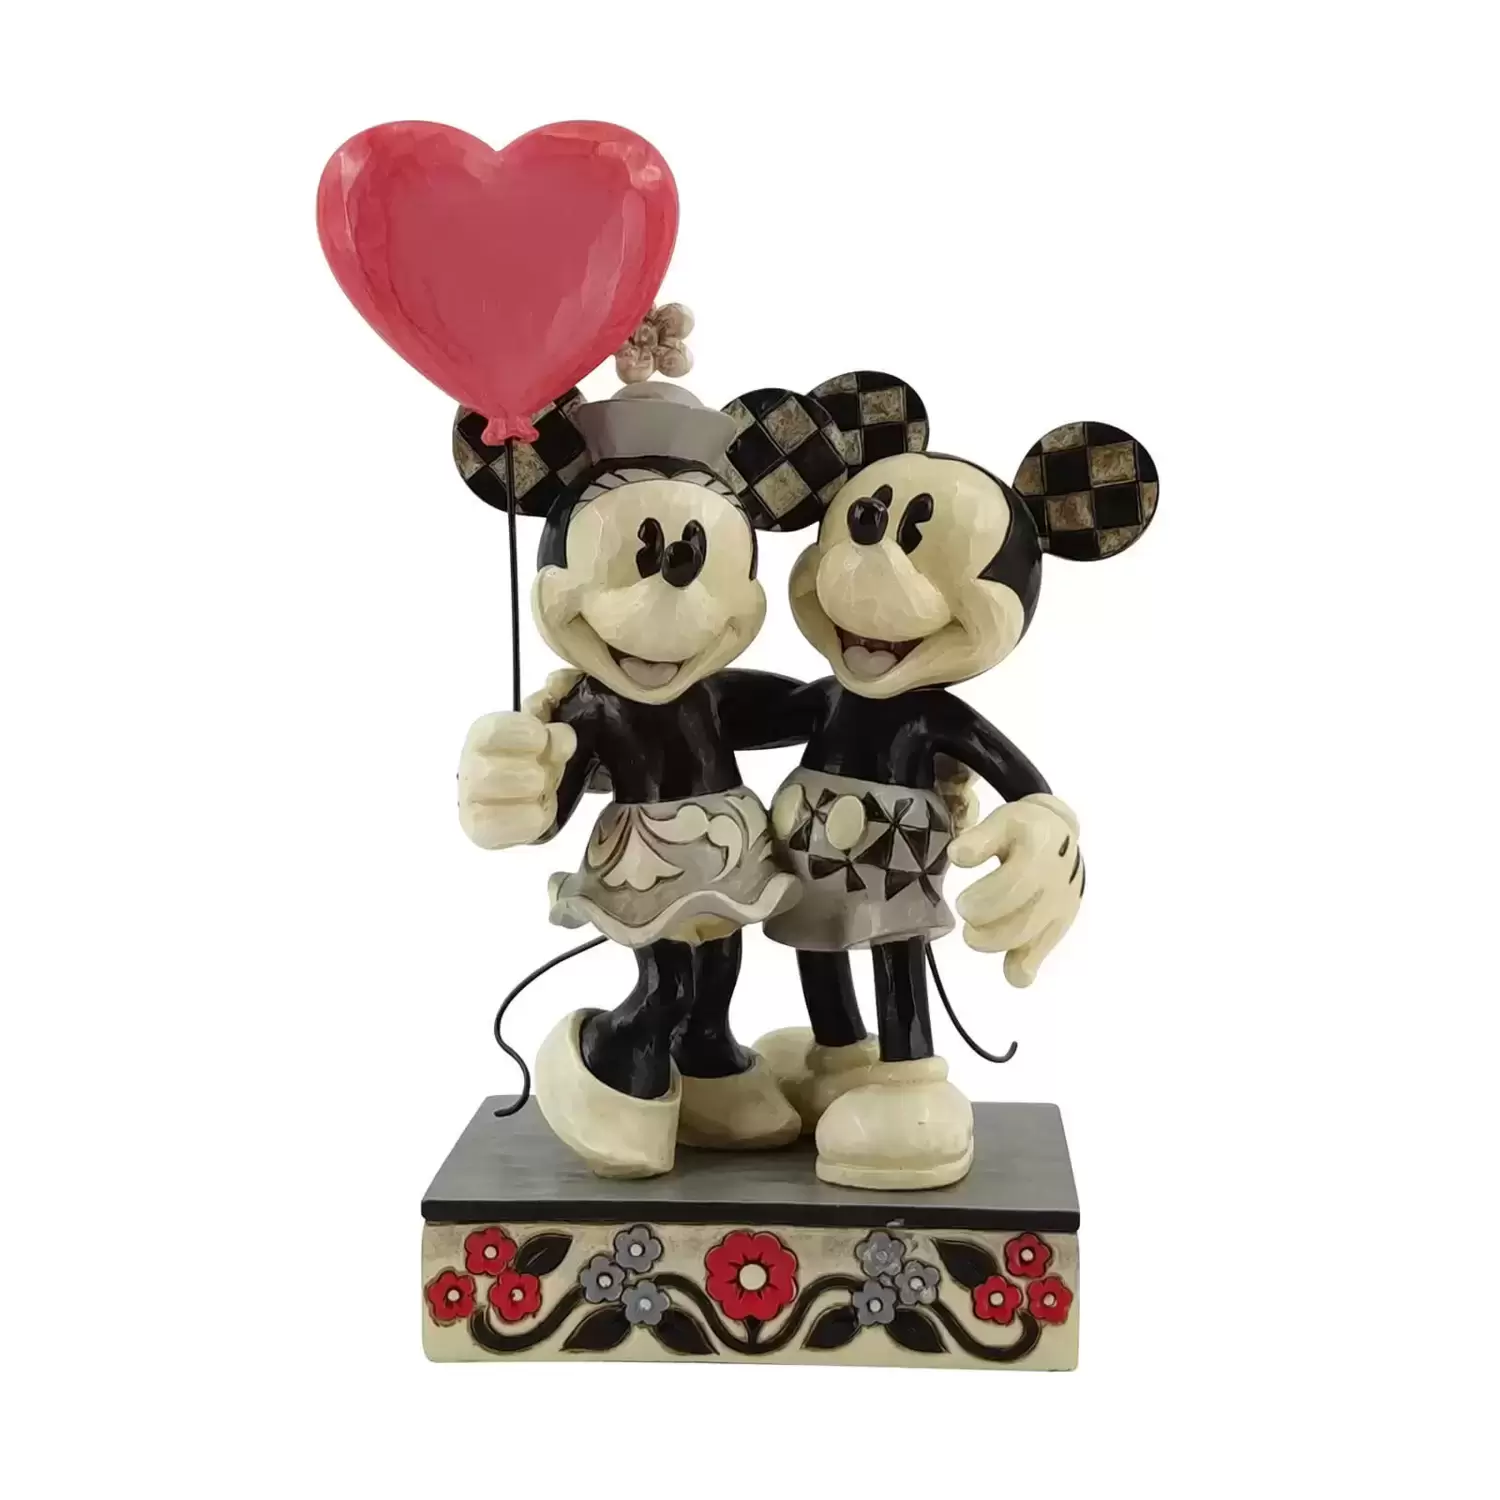 Disney Traditions by Jim Shore - Mickey And Minnie Heart (Love Balloon)